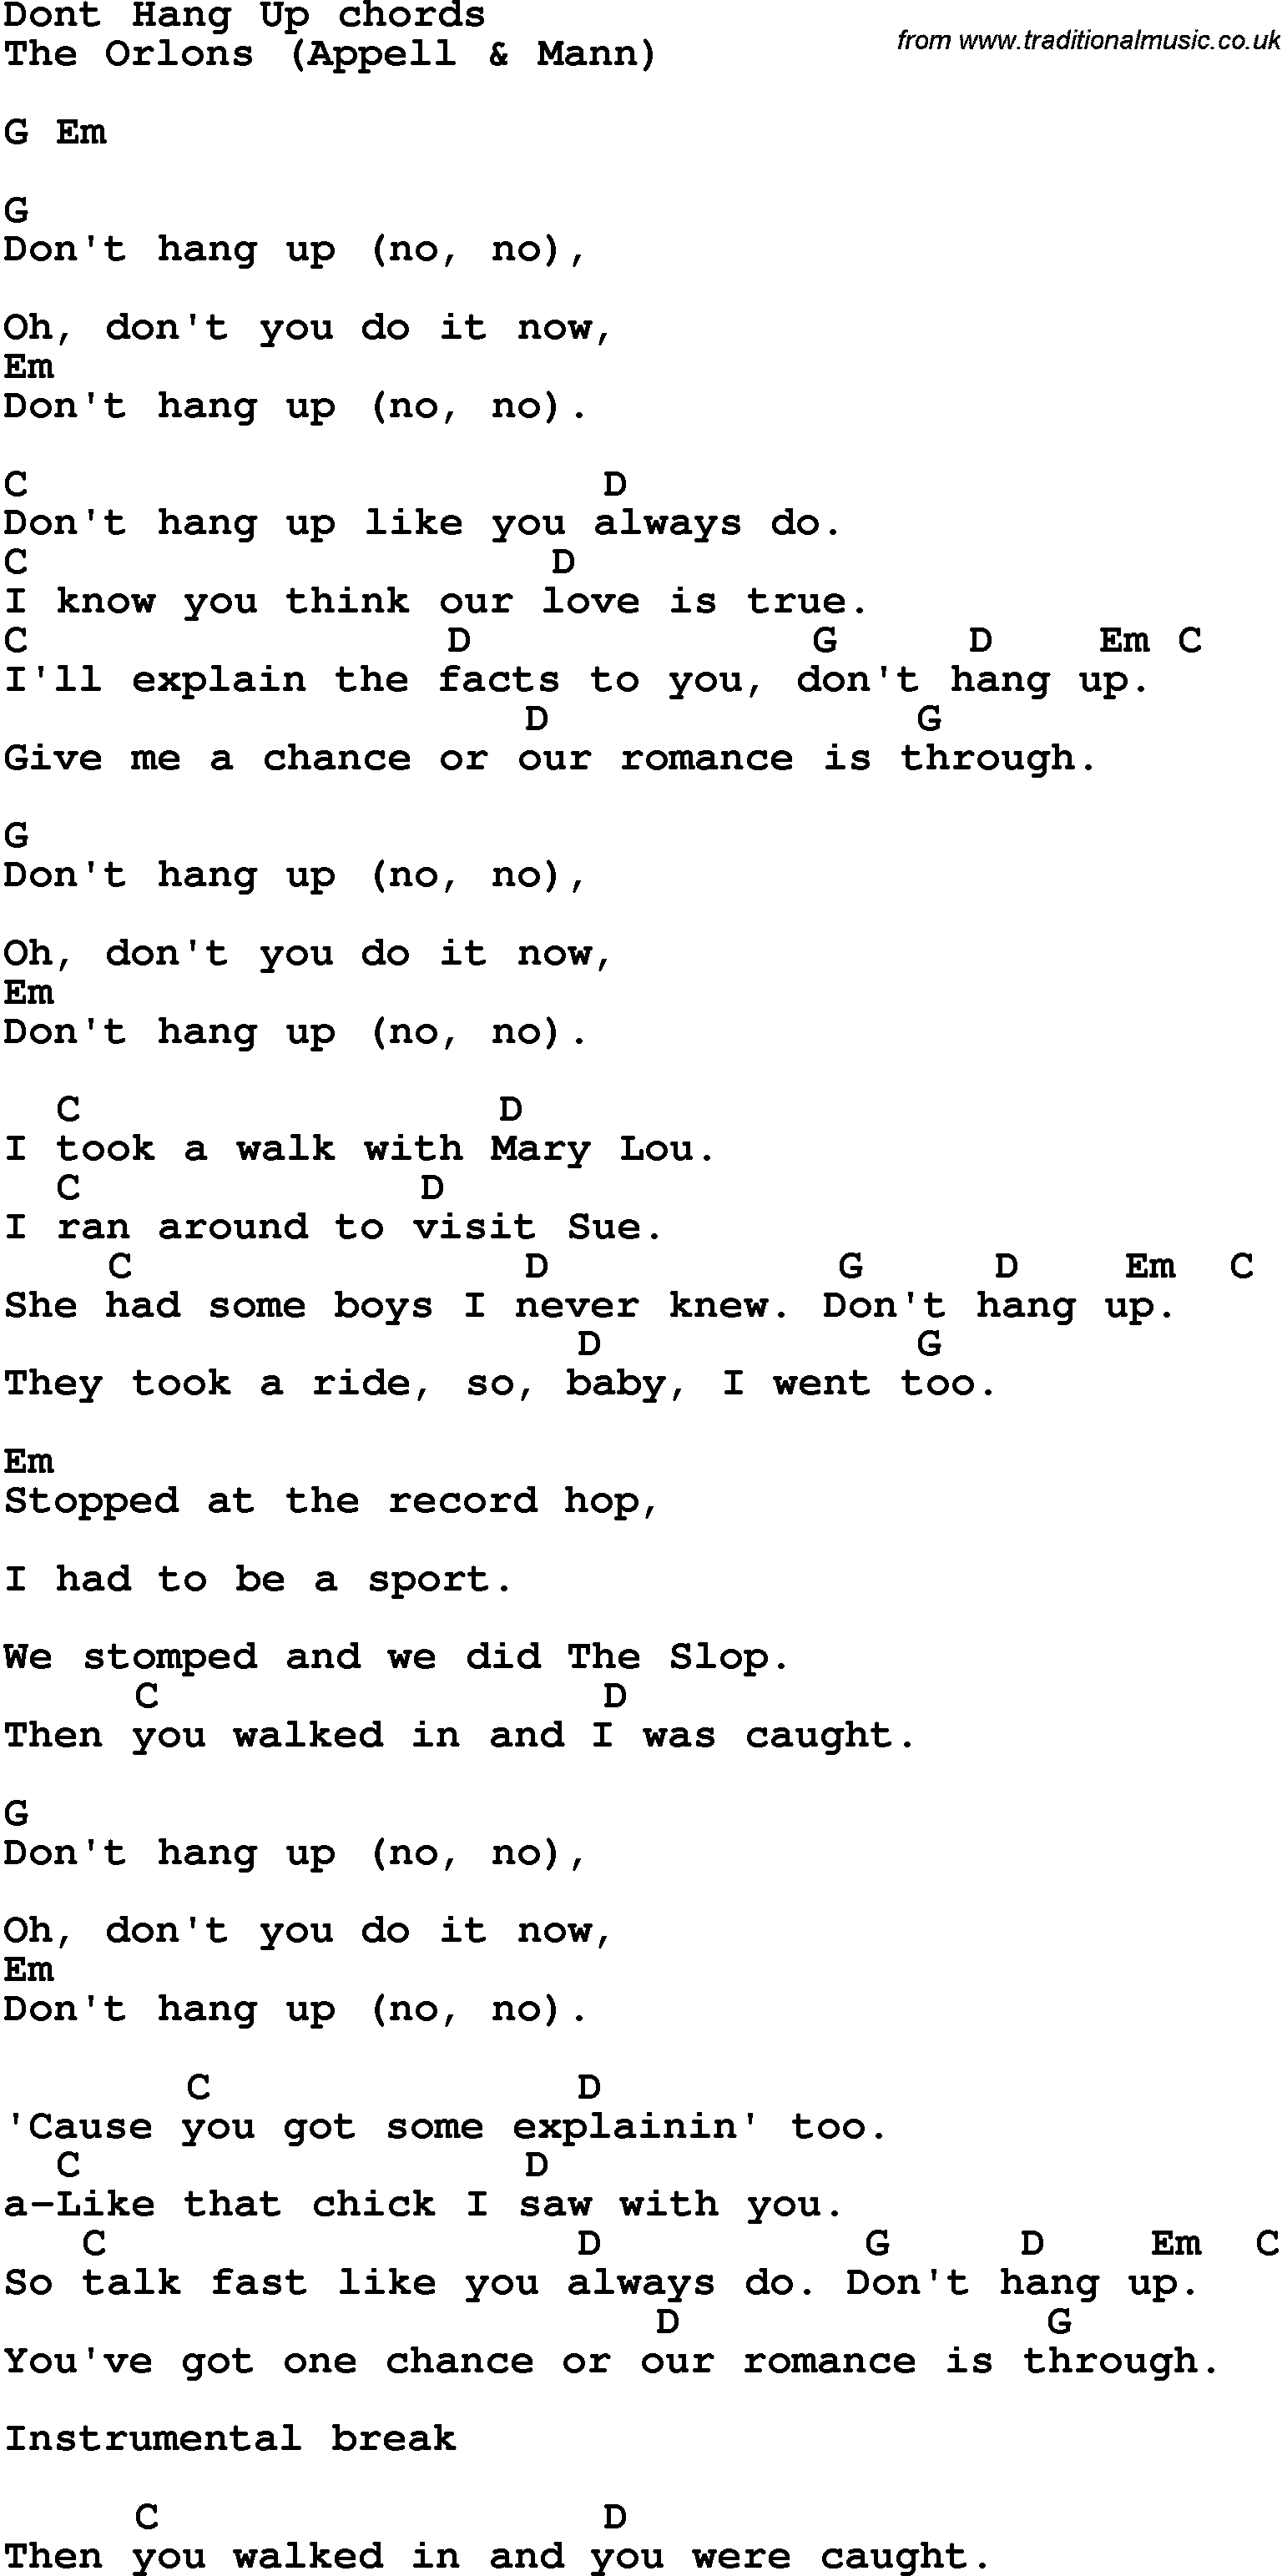 Song Lyrics with guitar chords for Don't Hang Up